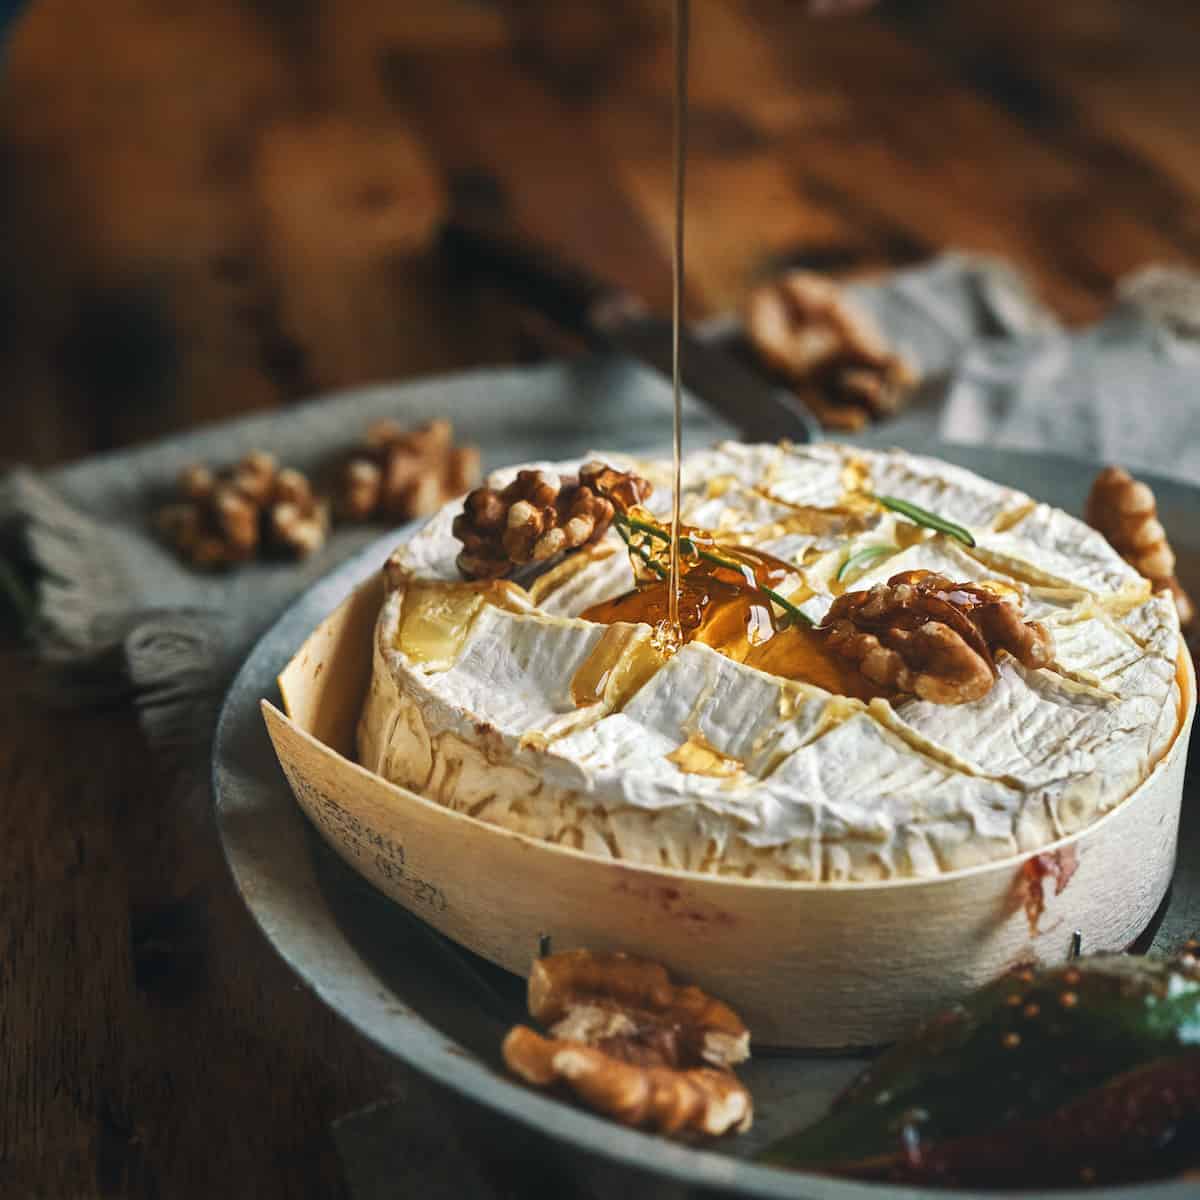 Baked camembert cheese on a plate with walnuts on top, honey being drizzled onto it.